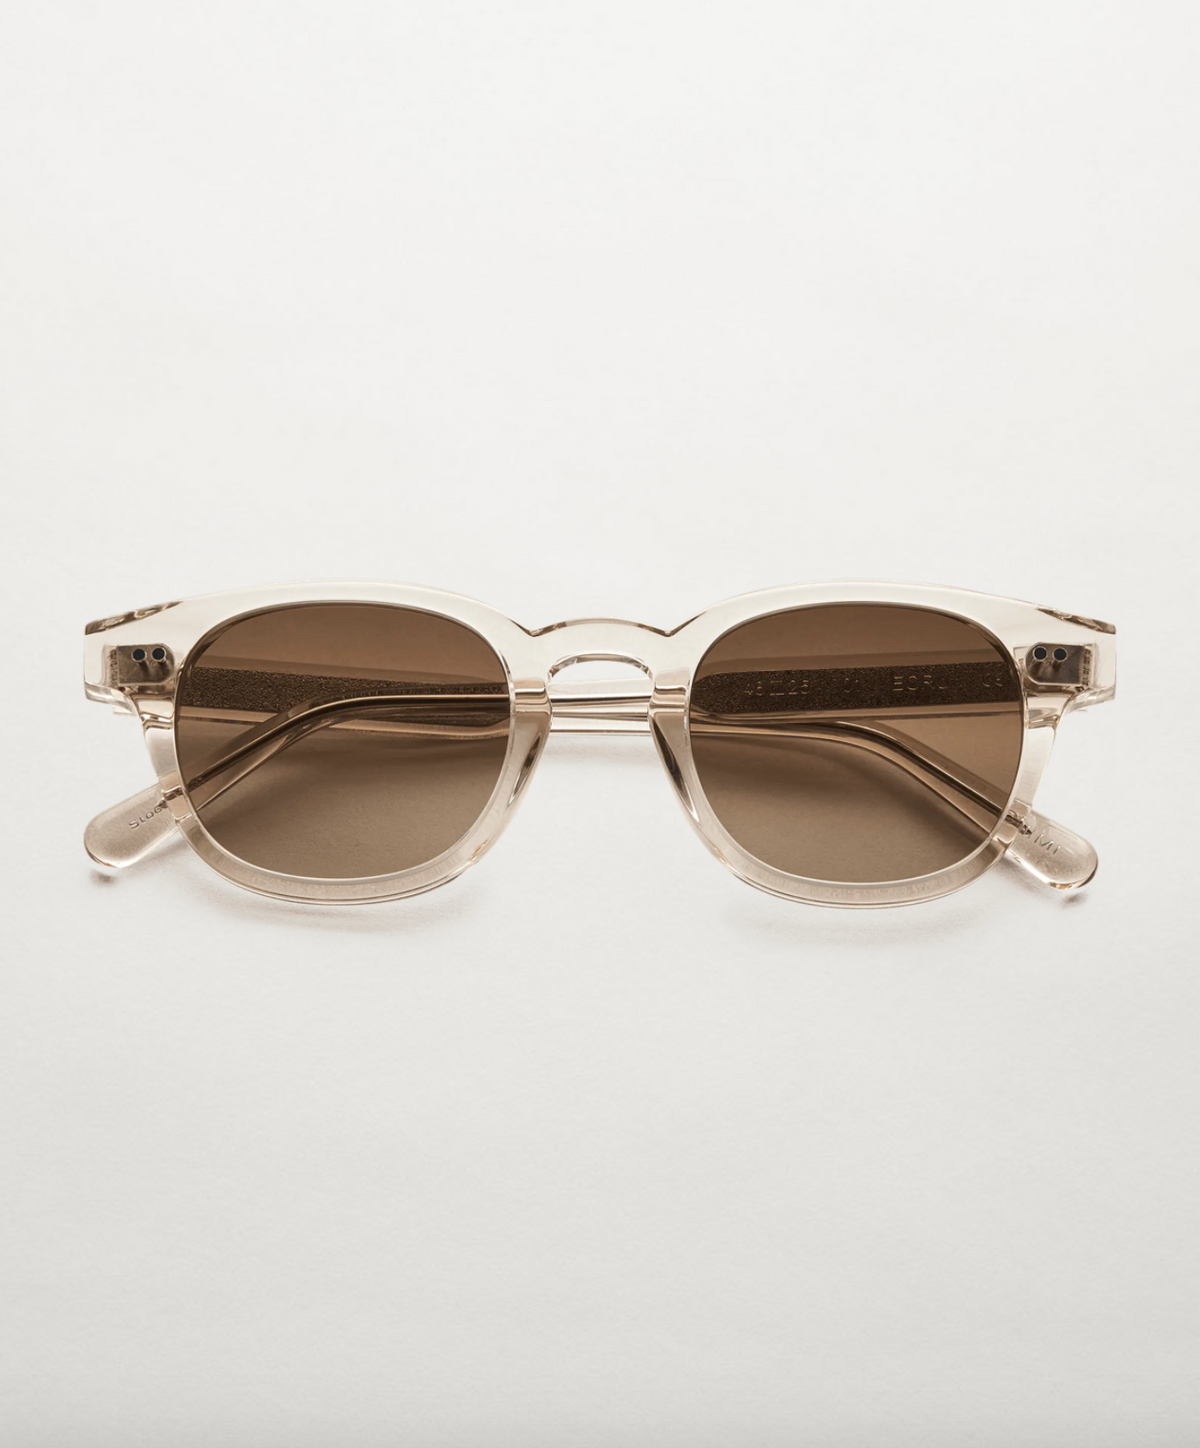 Rounded sunglasses in ecru coloured Italian acetate with light brown lenses